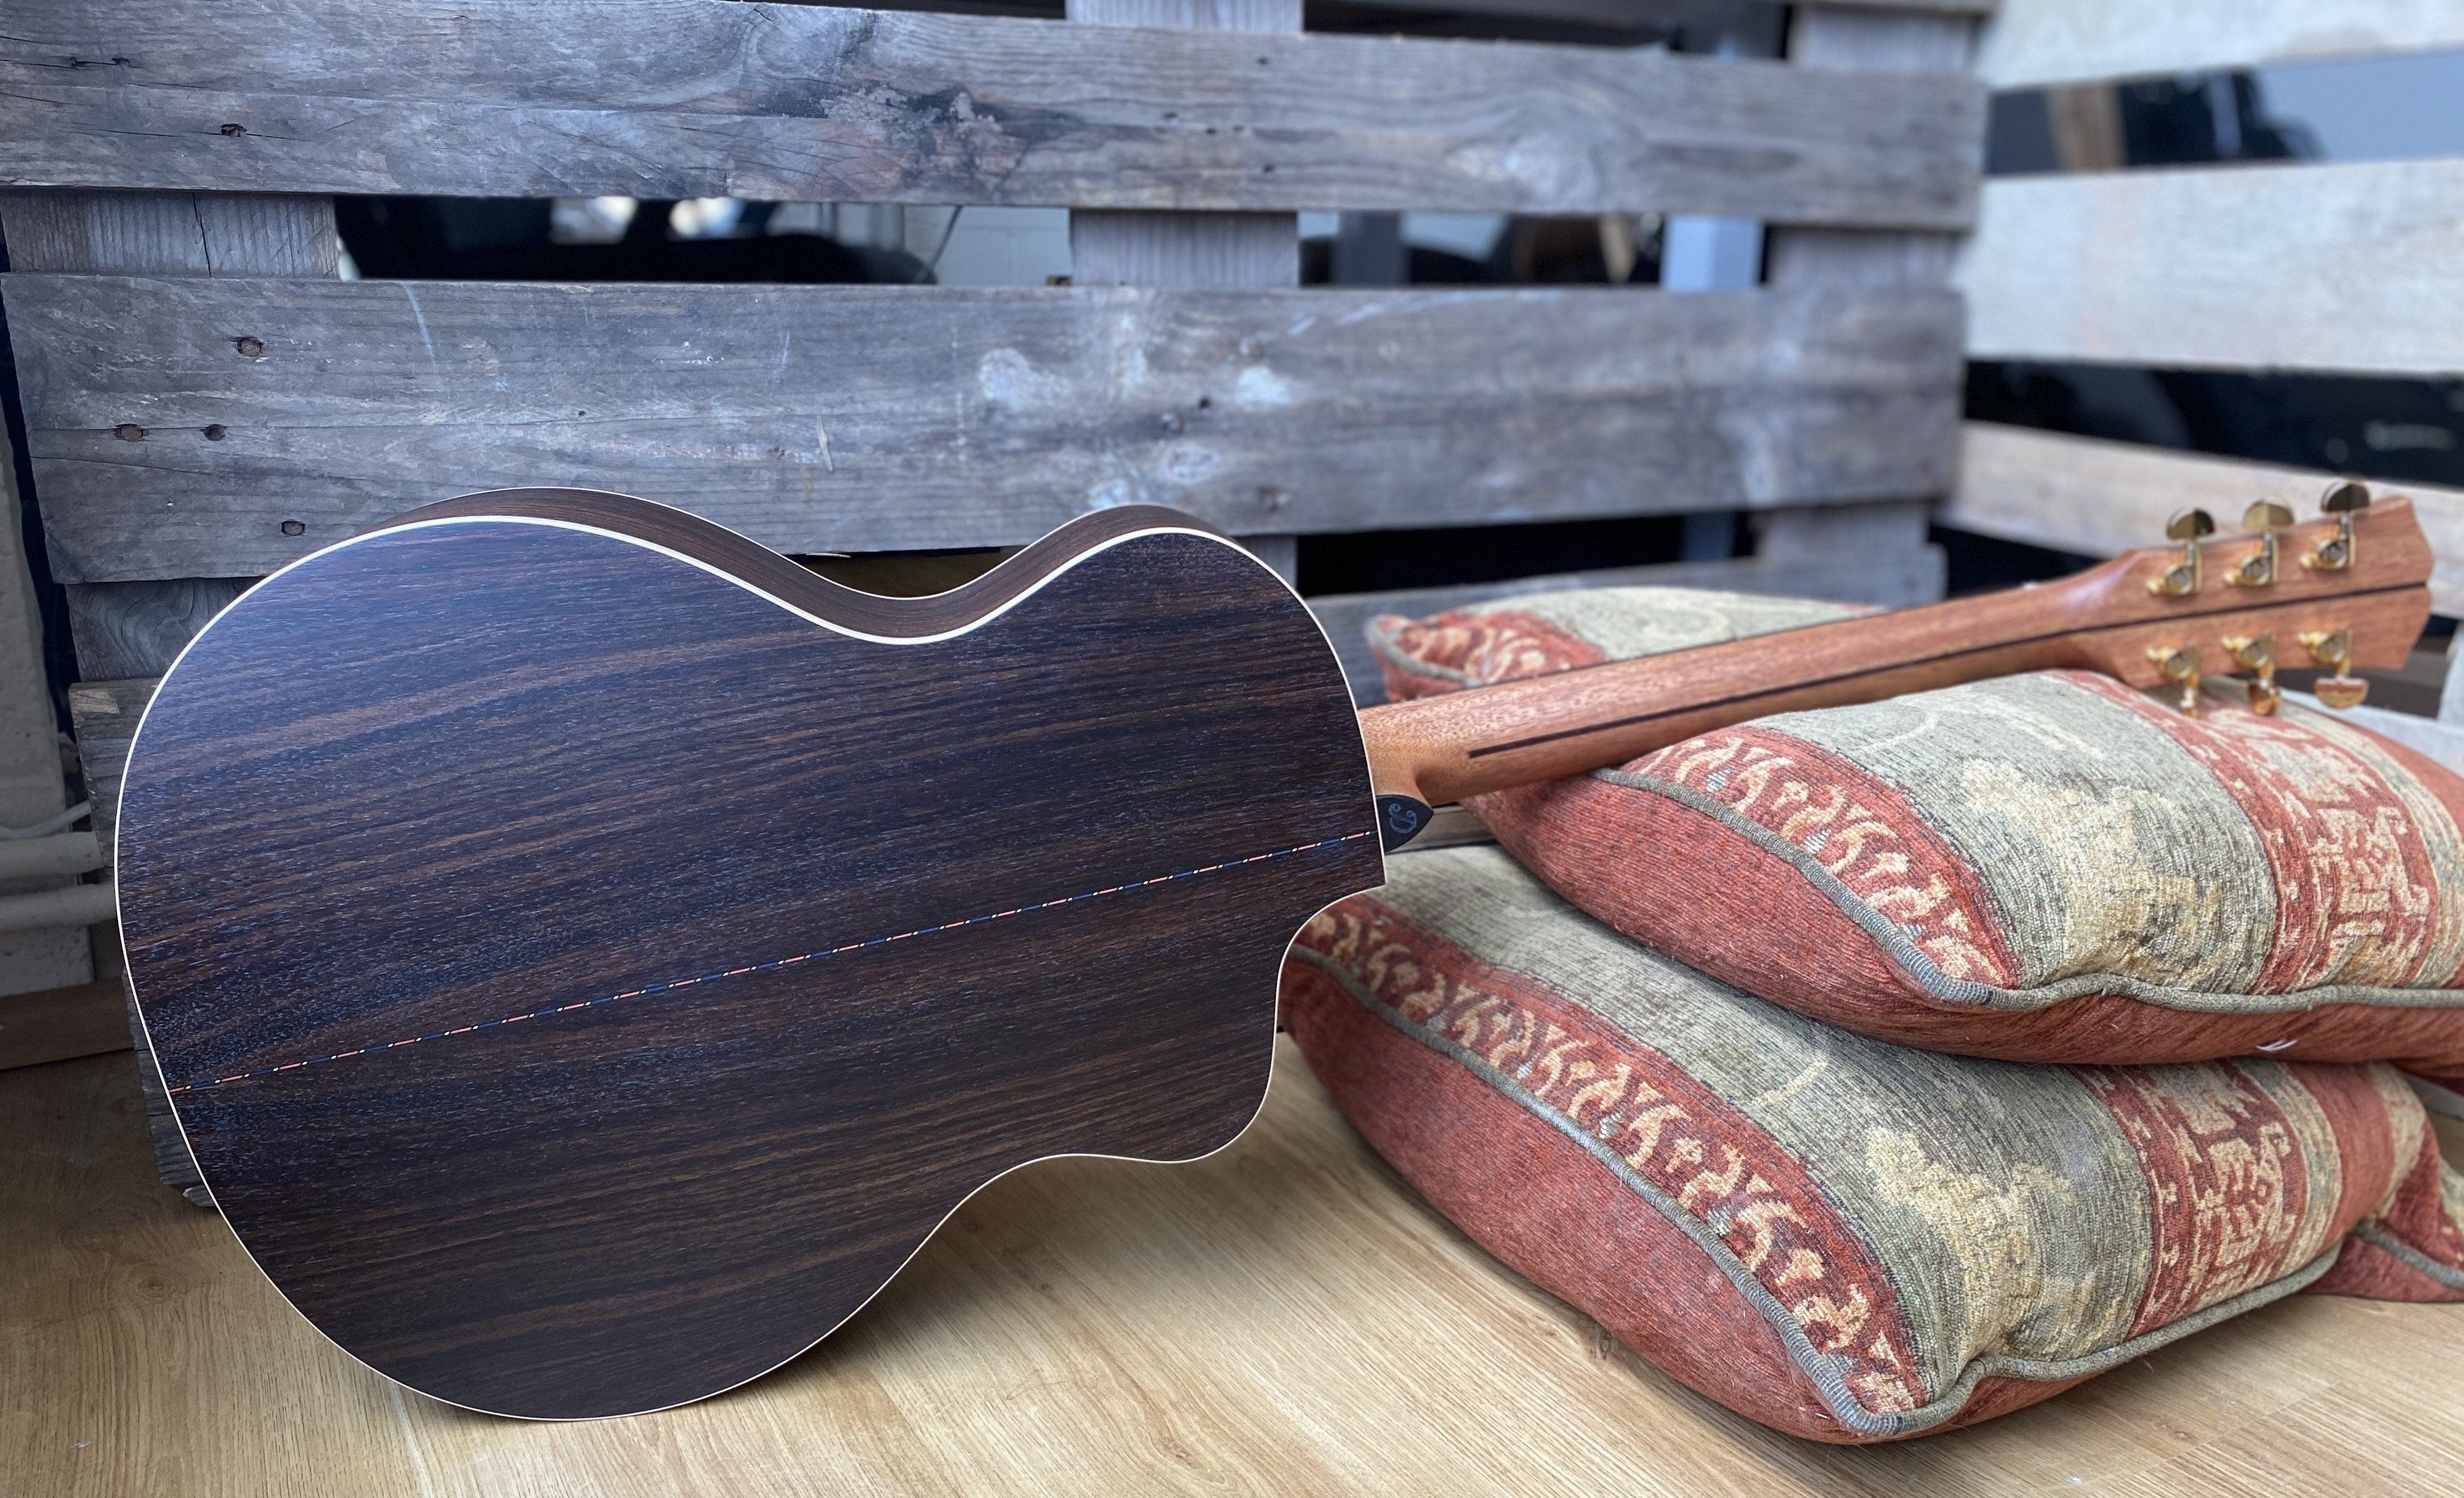 Dowina Rosewood (Ceres) Dolomite Spruce Cutawatay Left Handed, Acoustic Guitar for sale at Richards Guitars.